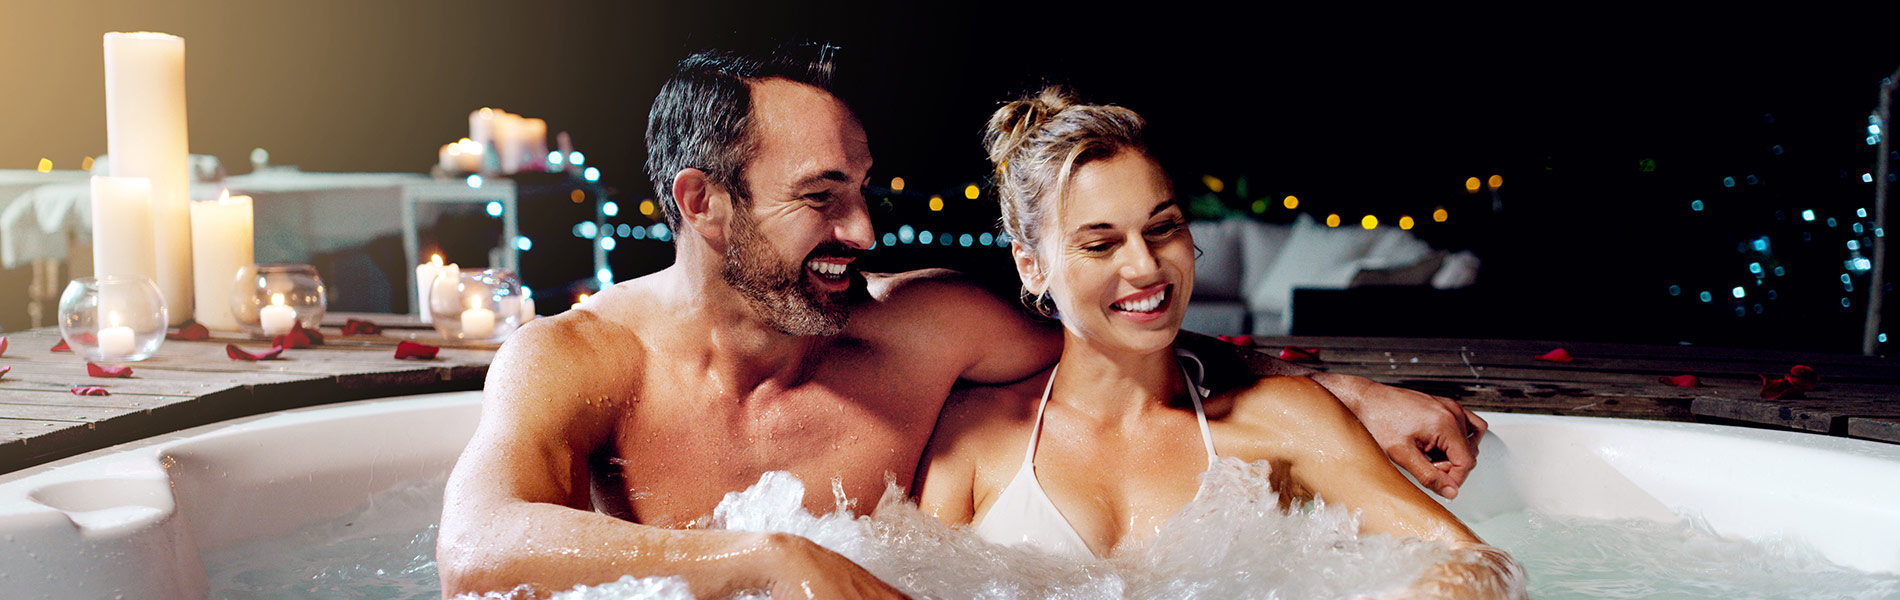 12 Health Benefits of Investing in a Hot Tub